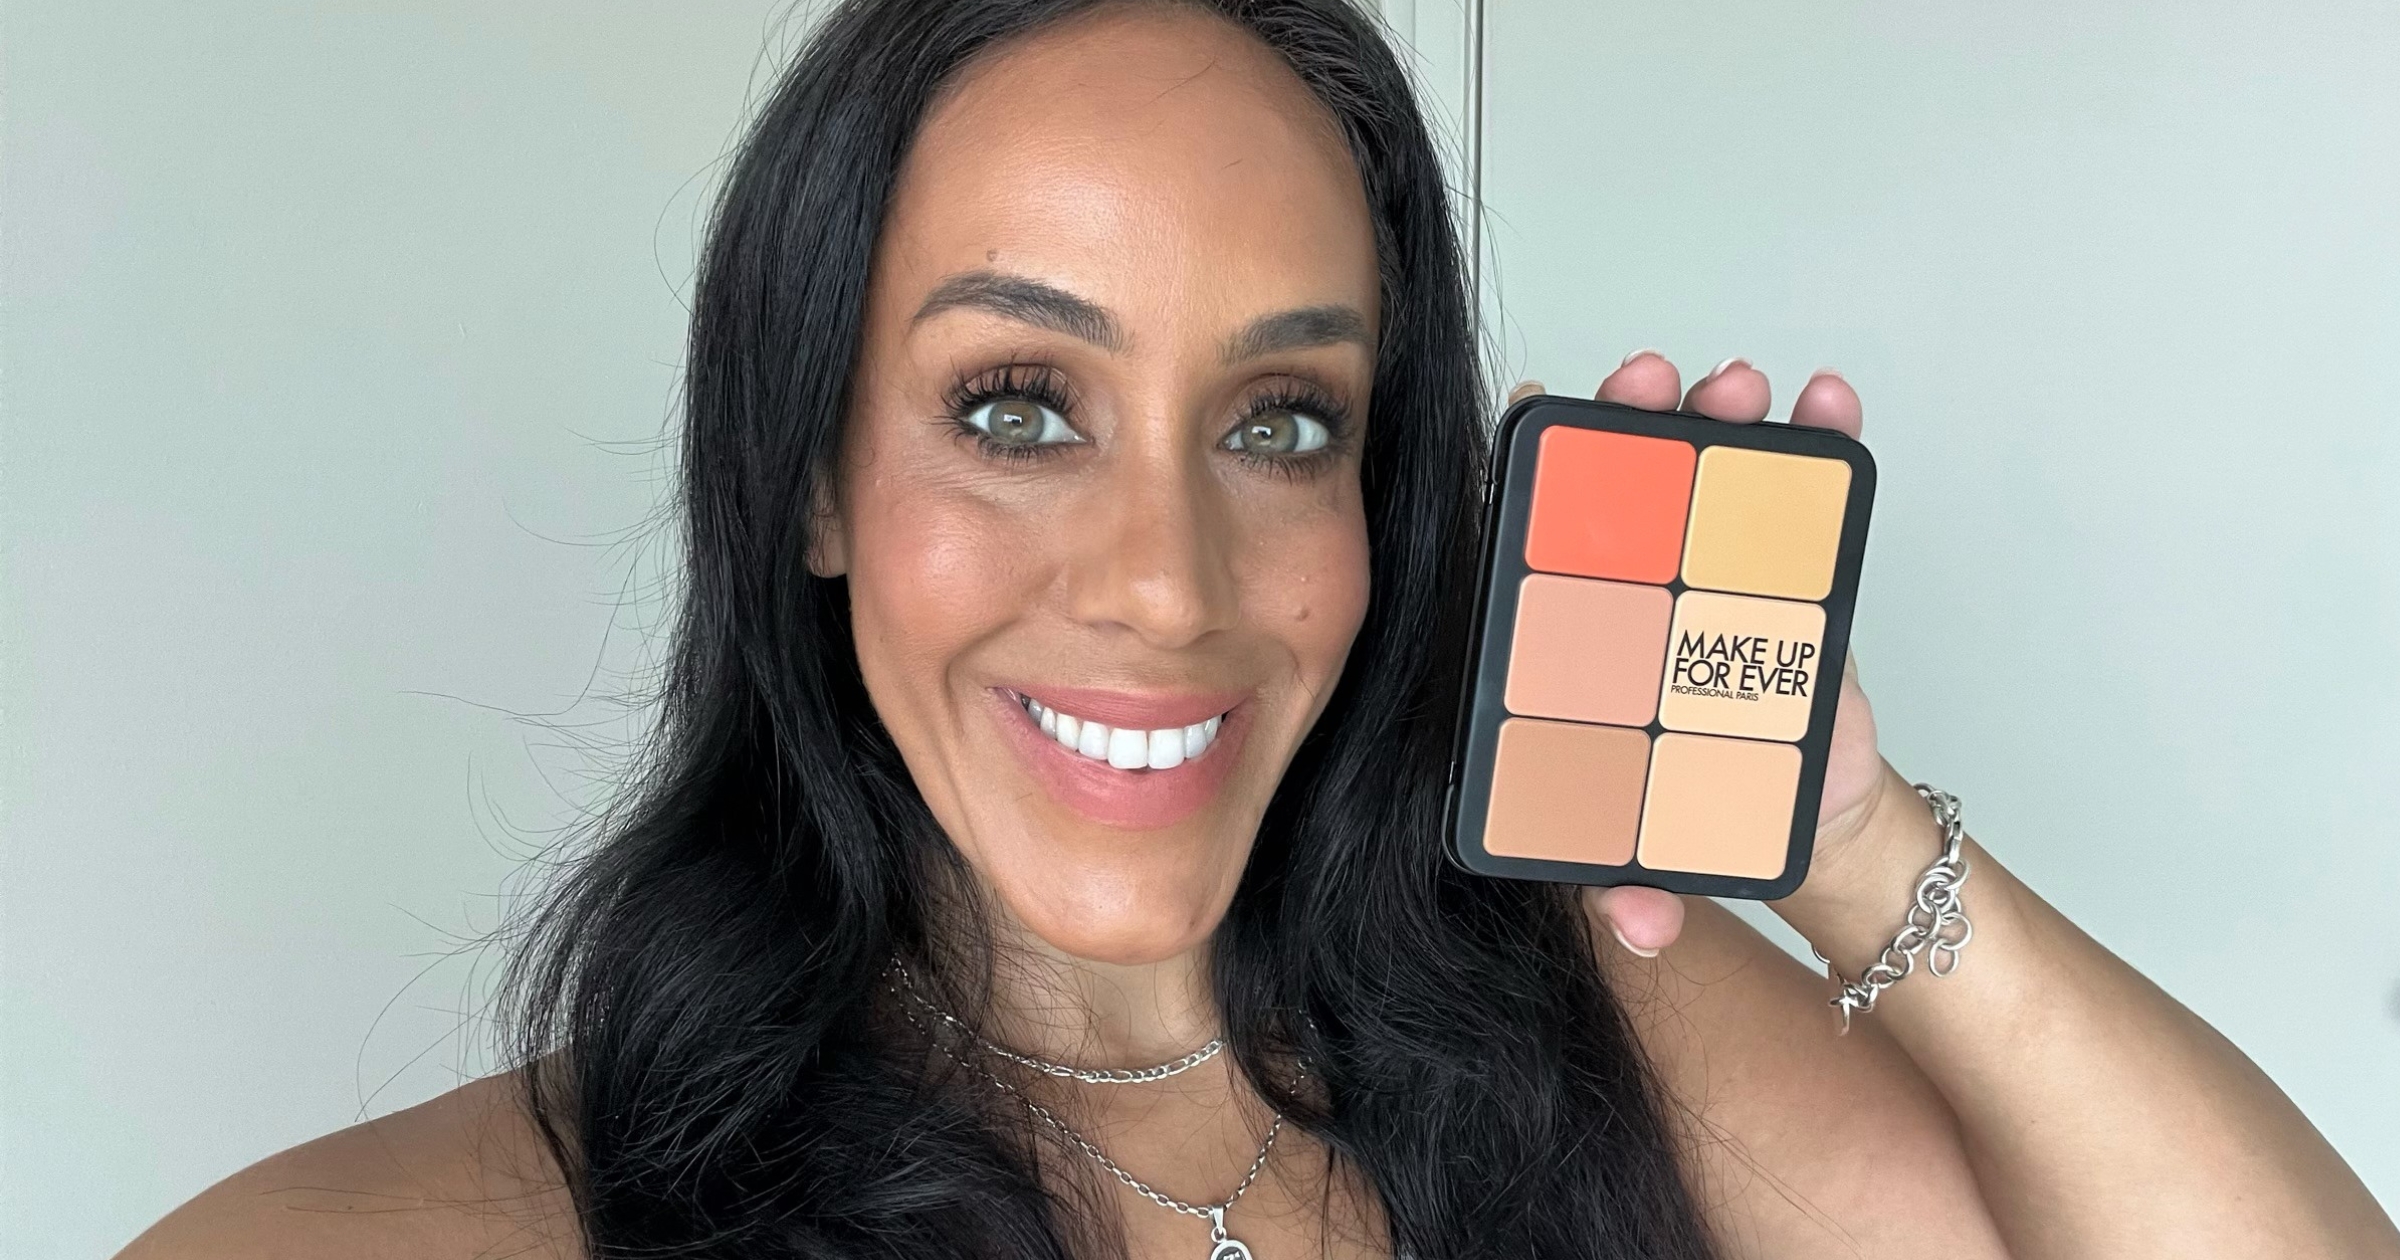 I Tried the MAKE UP FOR EVER All-in-One Cream Makeup Palette Viral on TikTok